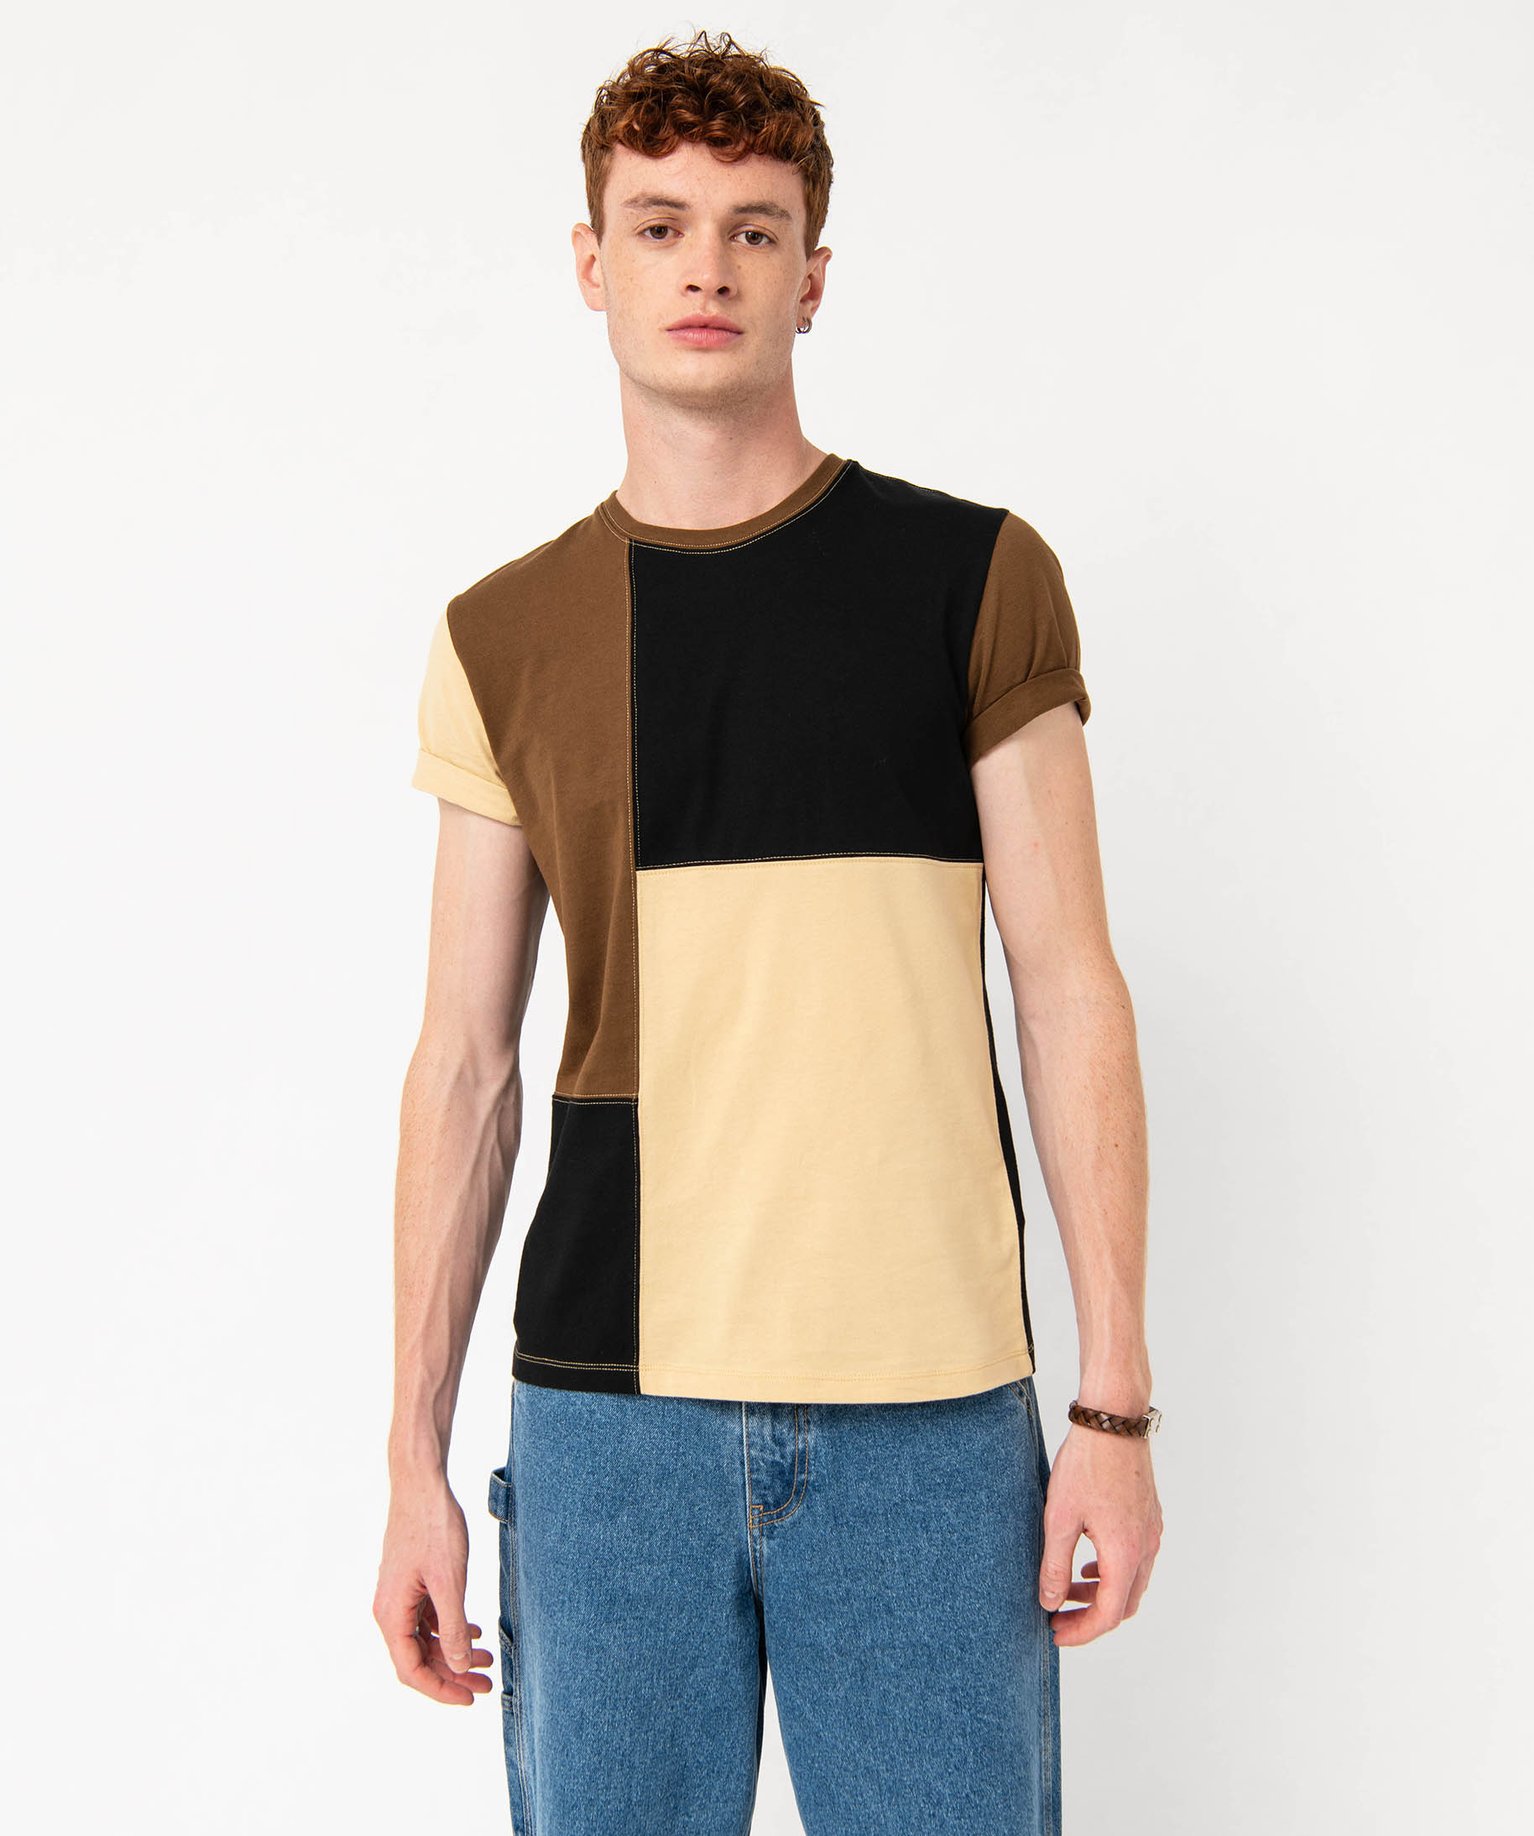 tee-shirt a manches courtes effet patchwork homme beige tee-shirts